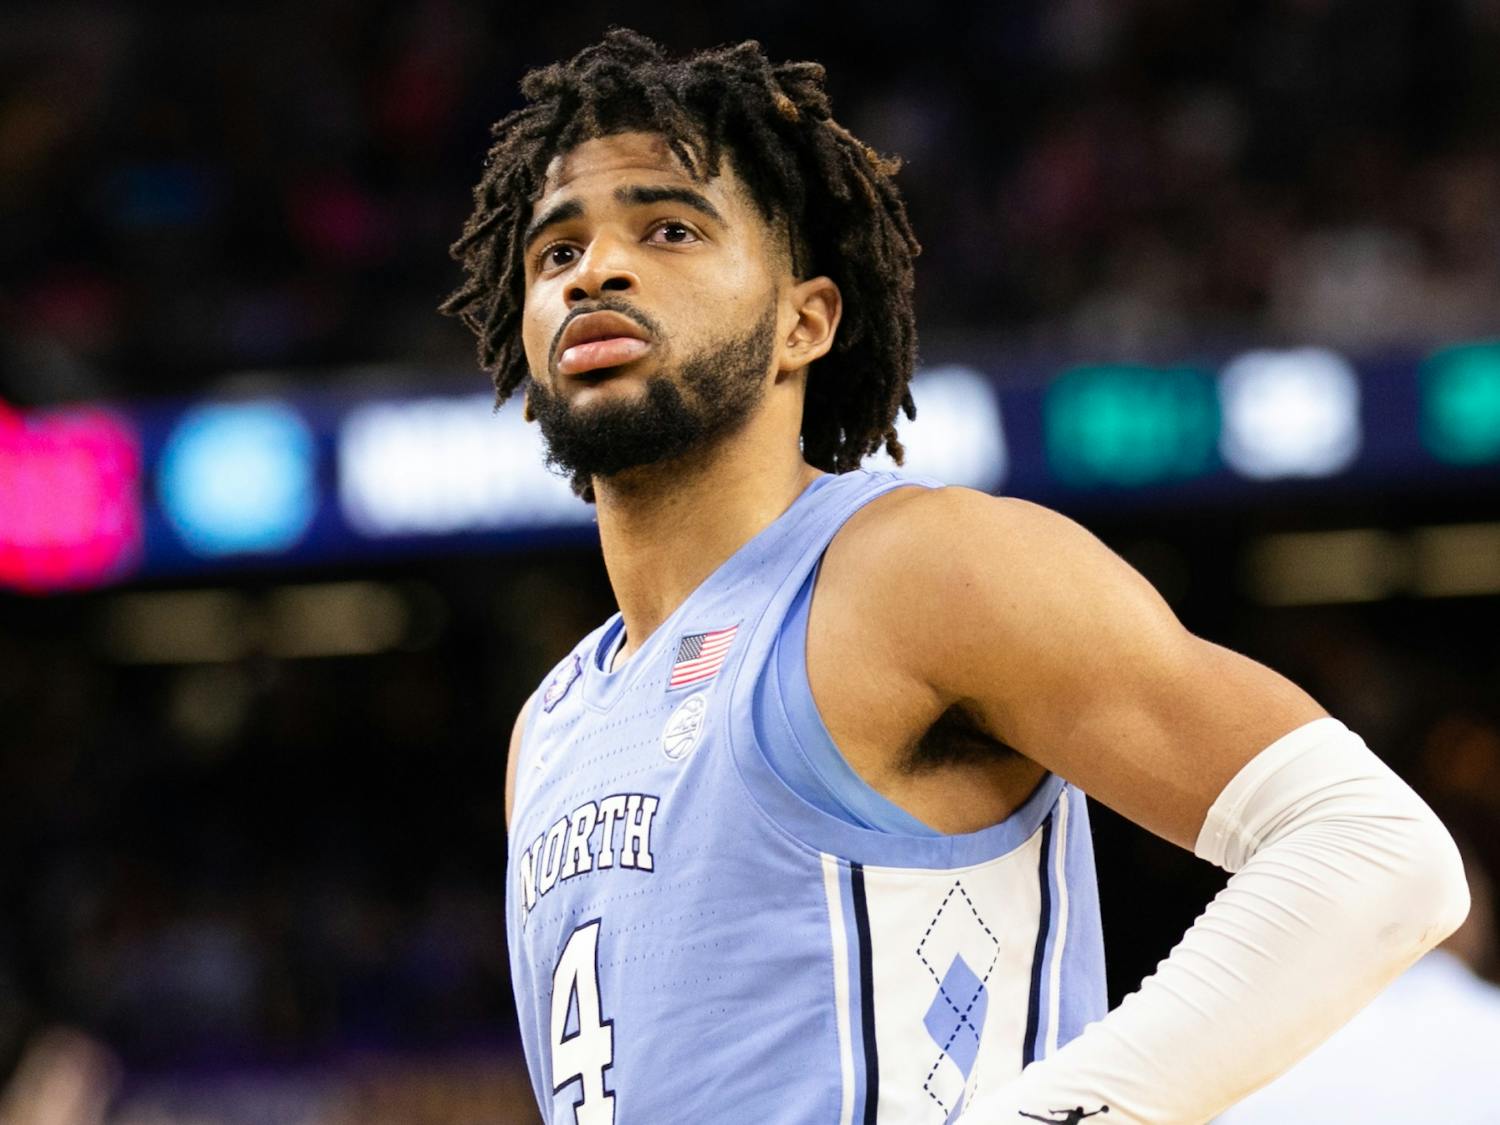 UNC sophomore guard RJ Davis (4) begins to tear up during the final seconds of the NCAA championship game against Kansas in New Orleans on Monday, April 4, 2022. UNC lost 72-69.